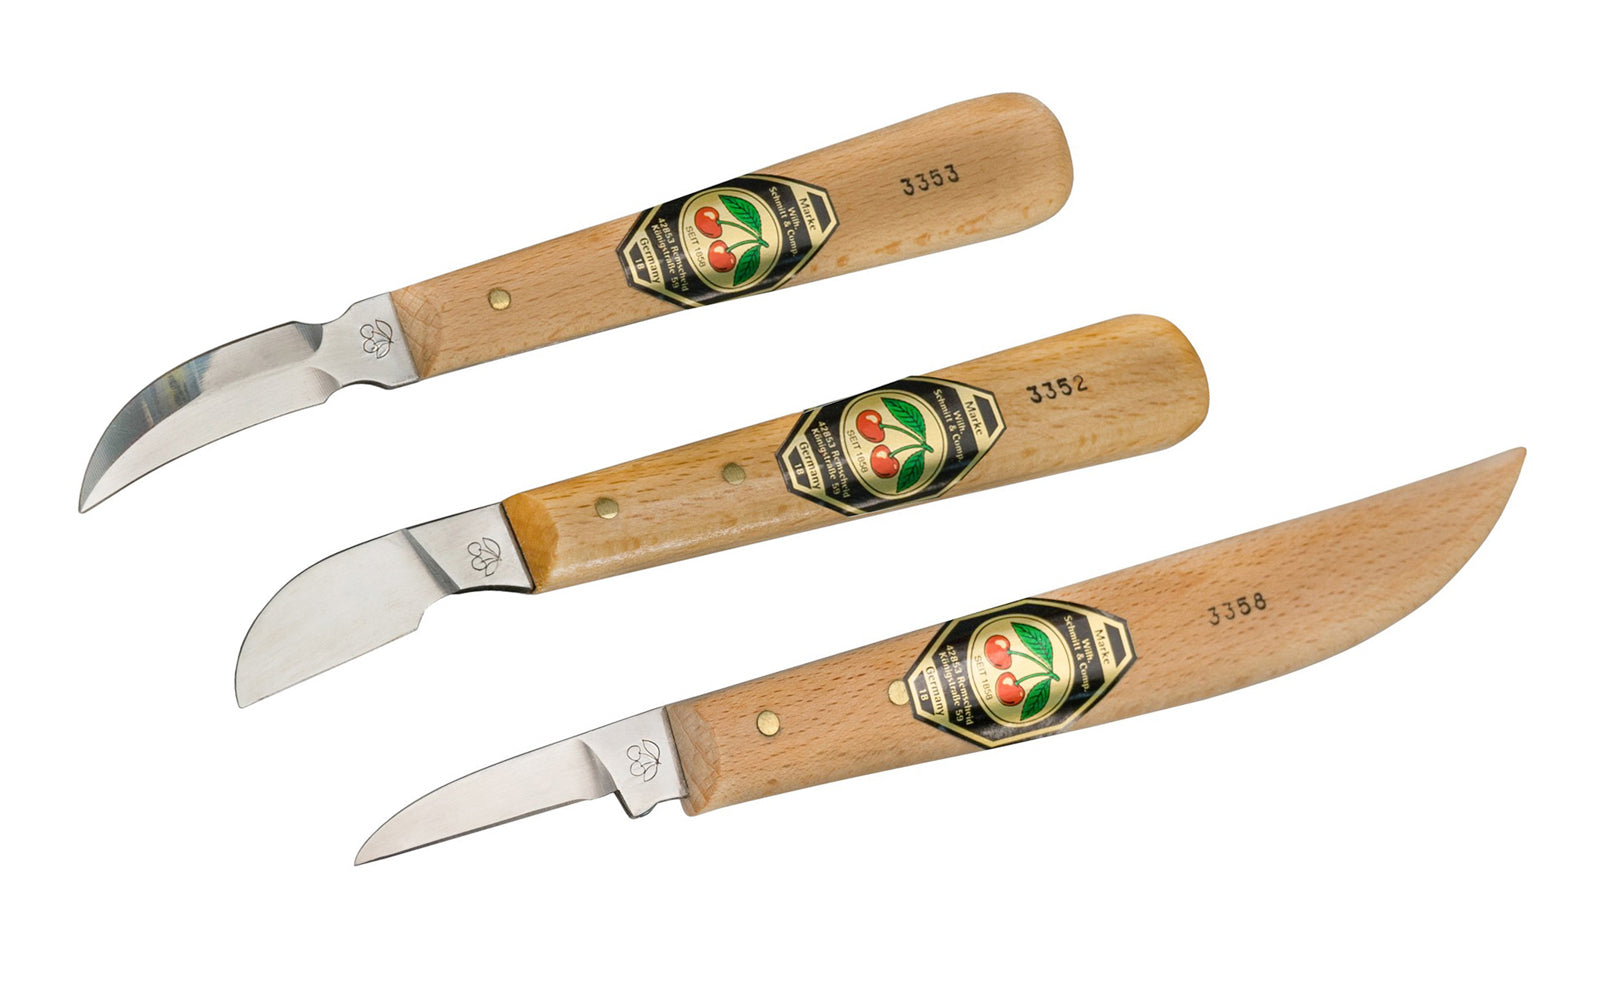 A quality 3-Piece Chip Carving Knife Set made by Two Cherries in Germany containing three of their most popular models. Includes the Straight Edge Blade 3358, Double Sided Curved Edge 3353, Long Skew Edge 3352. High carbon steel  blades. 5153303. 3304/000. 4016649033039. 3 PC chip carving set